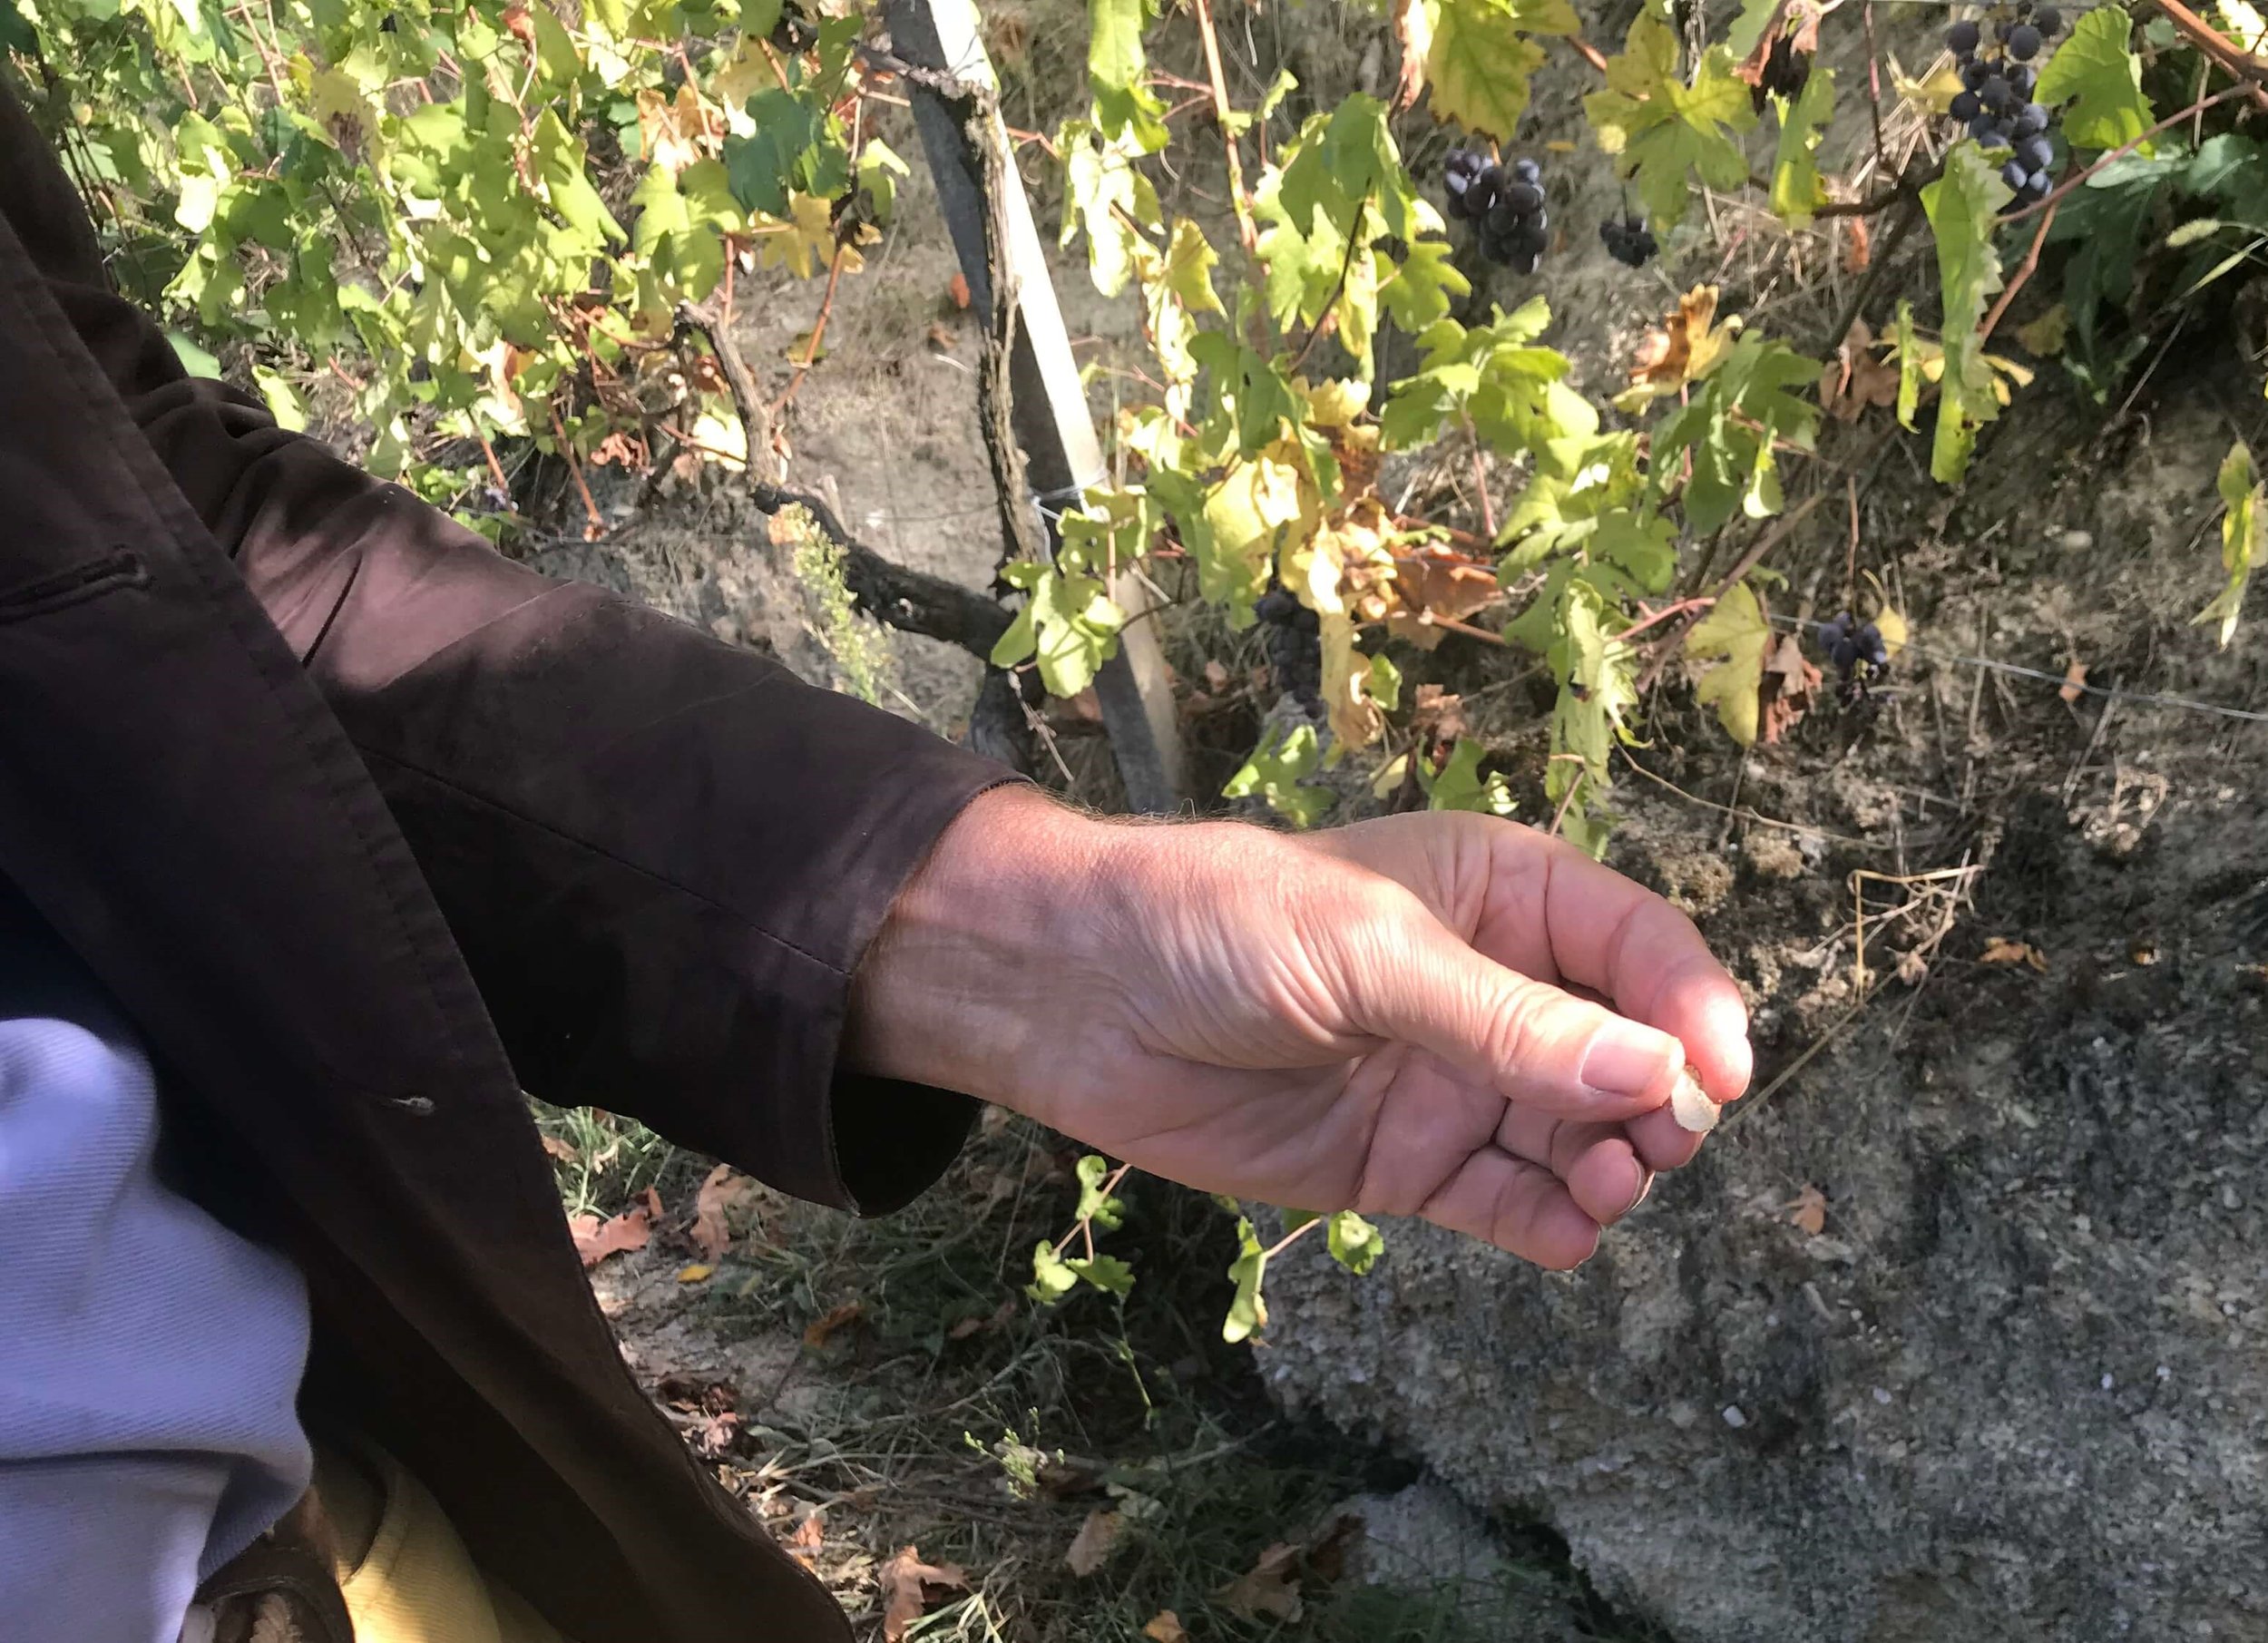 Lorenzo's Passion for Natural Wine